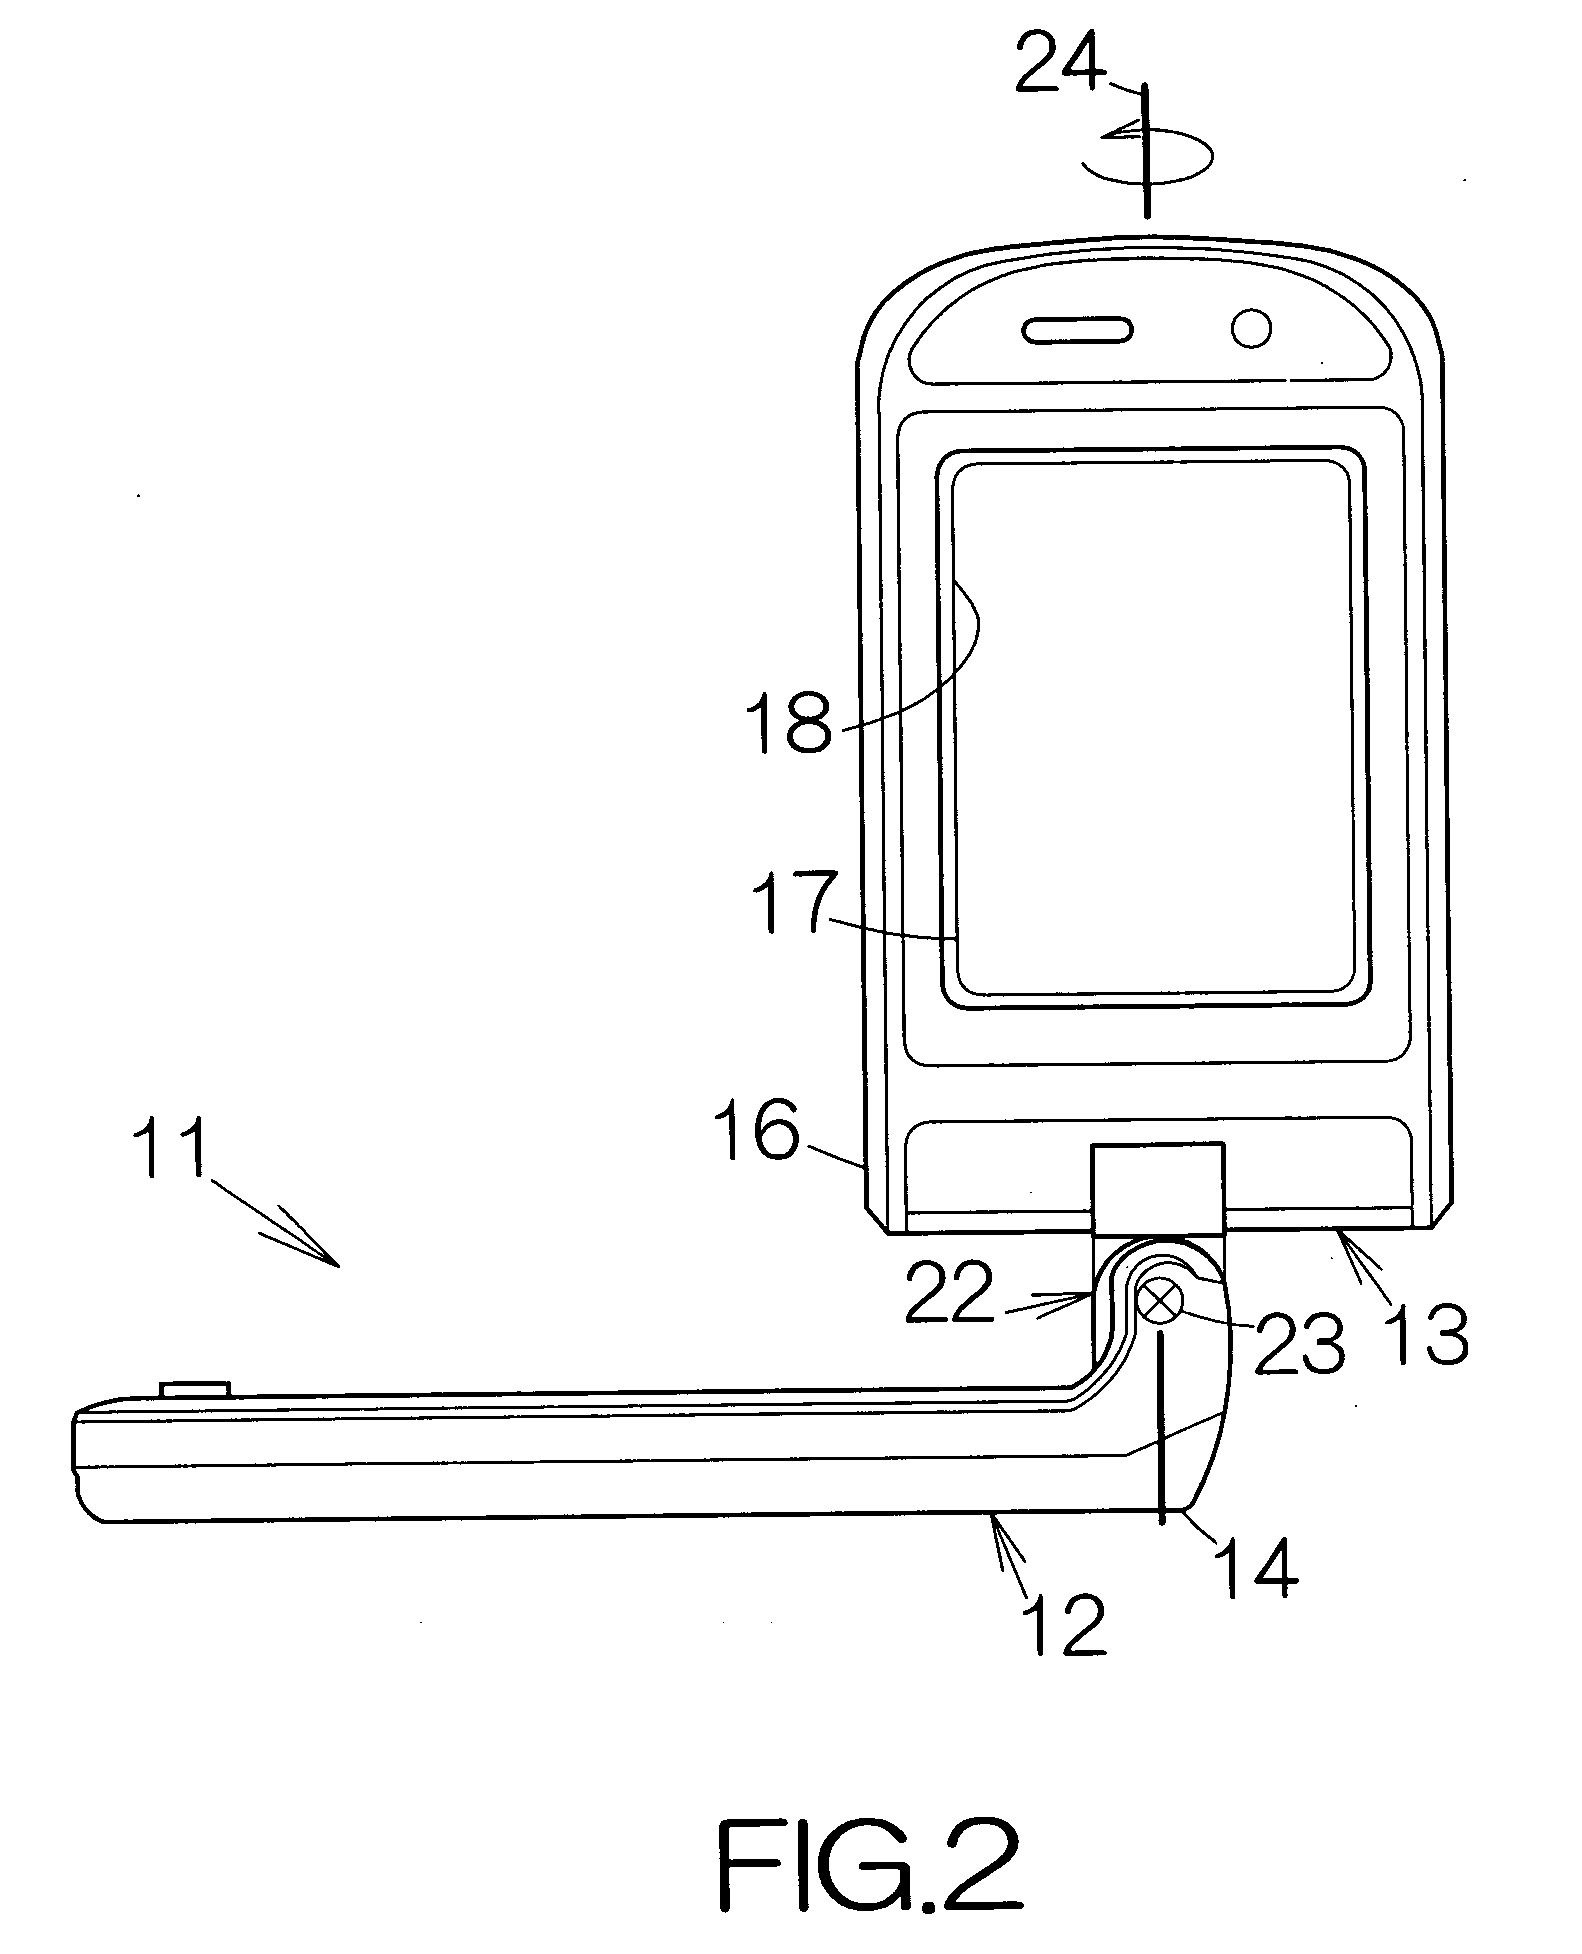 Bi-axial swivel assembly in electronic apparatus